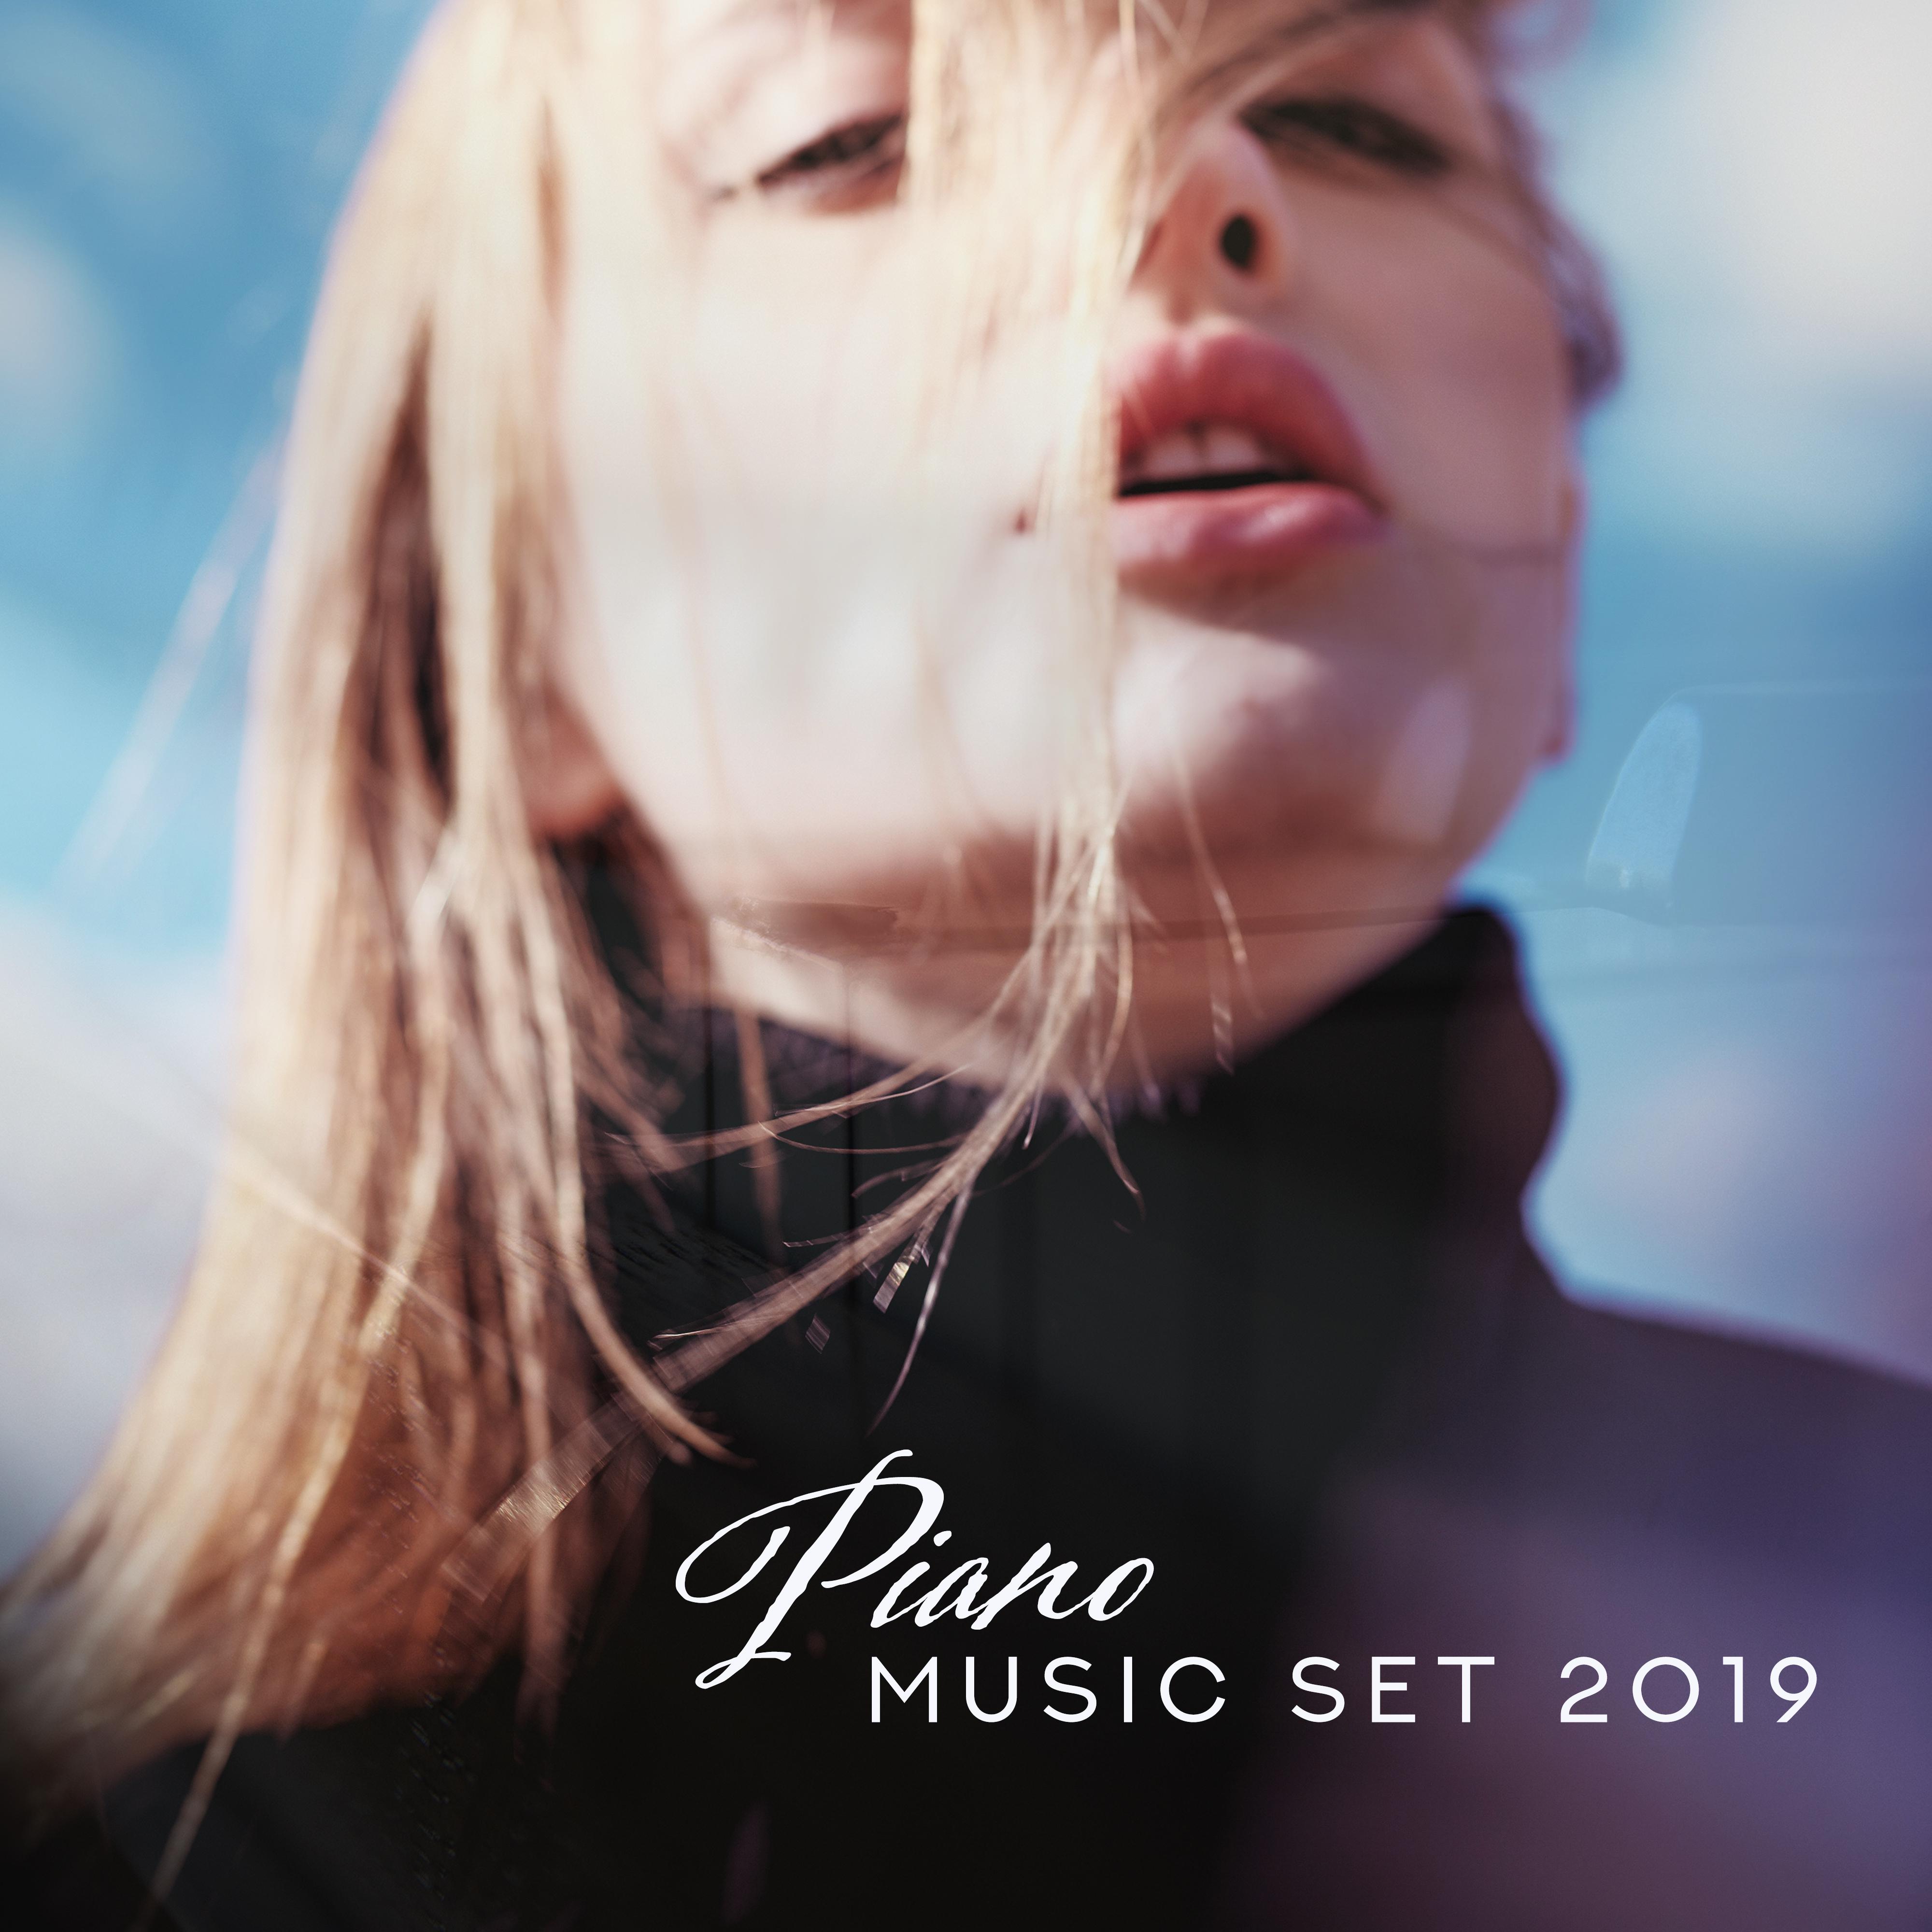 Piano Music Set 2019  Relaxing Jazz for Coffee, Restaurant, Rest  Relaxation, Smooth Music Reduces Stress, Relax After Work, Ambient Piano Collection 2019